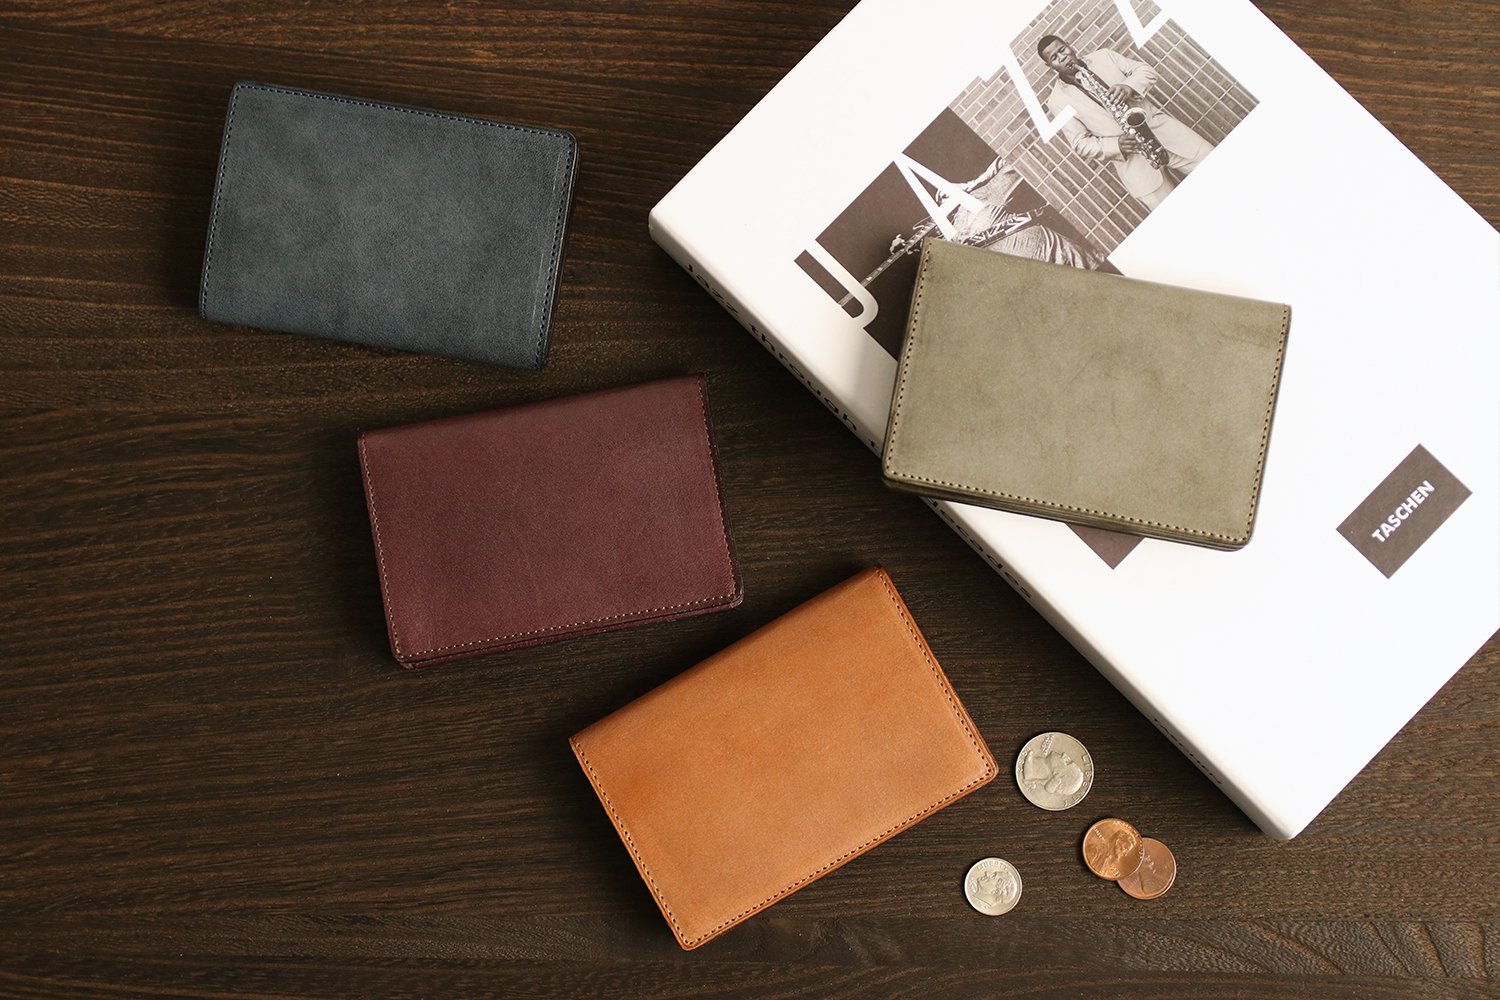 asumederu / ROROMA A business card holder made of pure domestic leather "Roroma" whose color deepens the more you use it. 